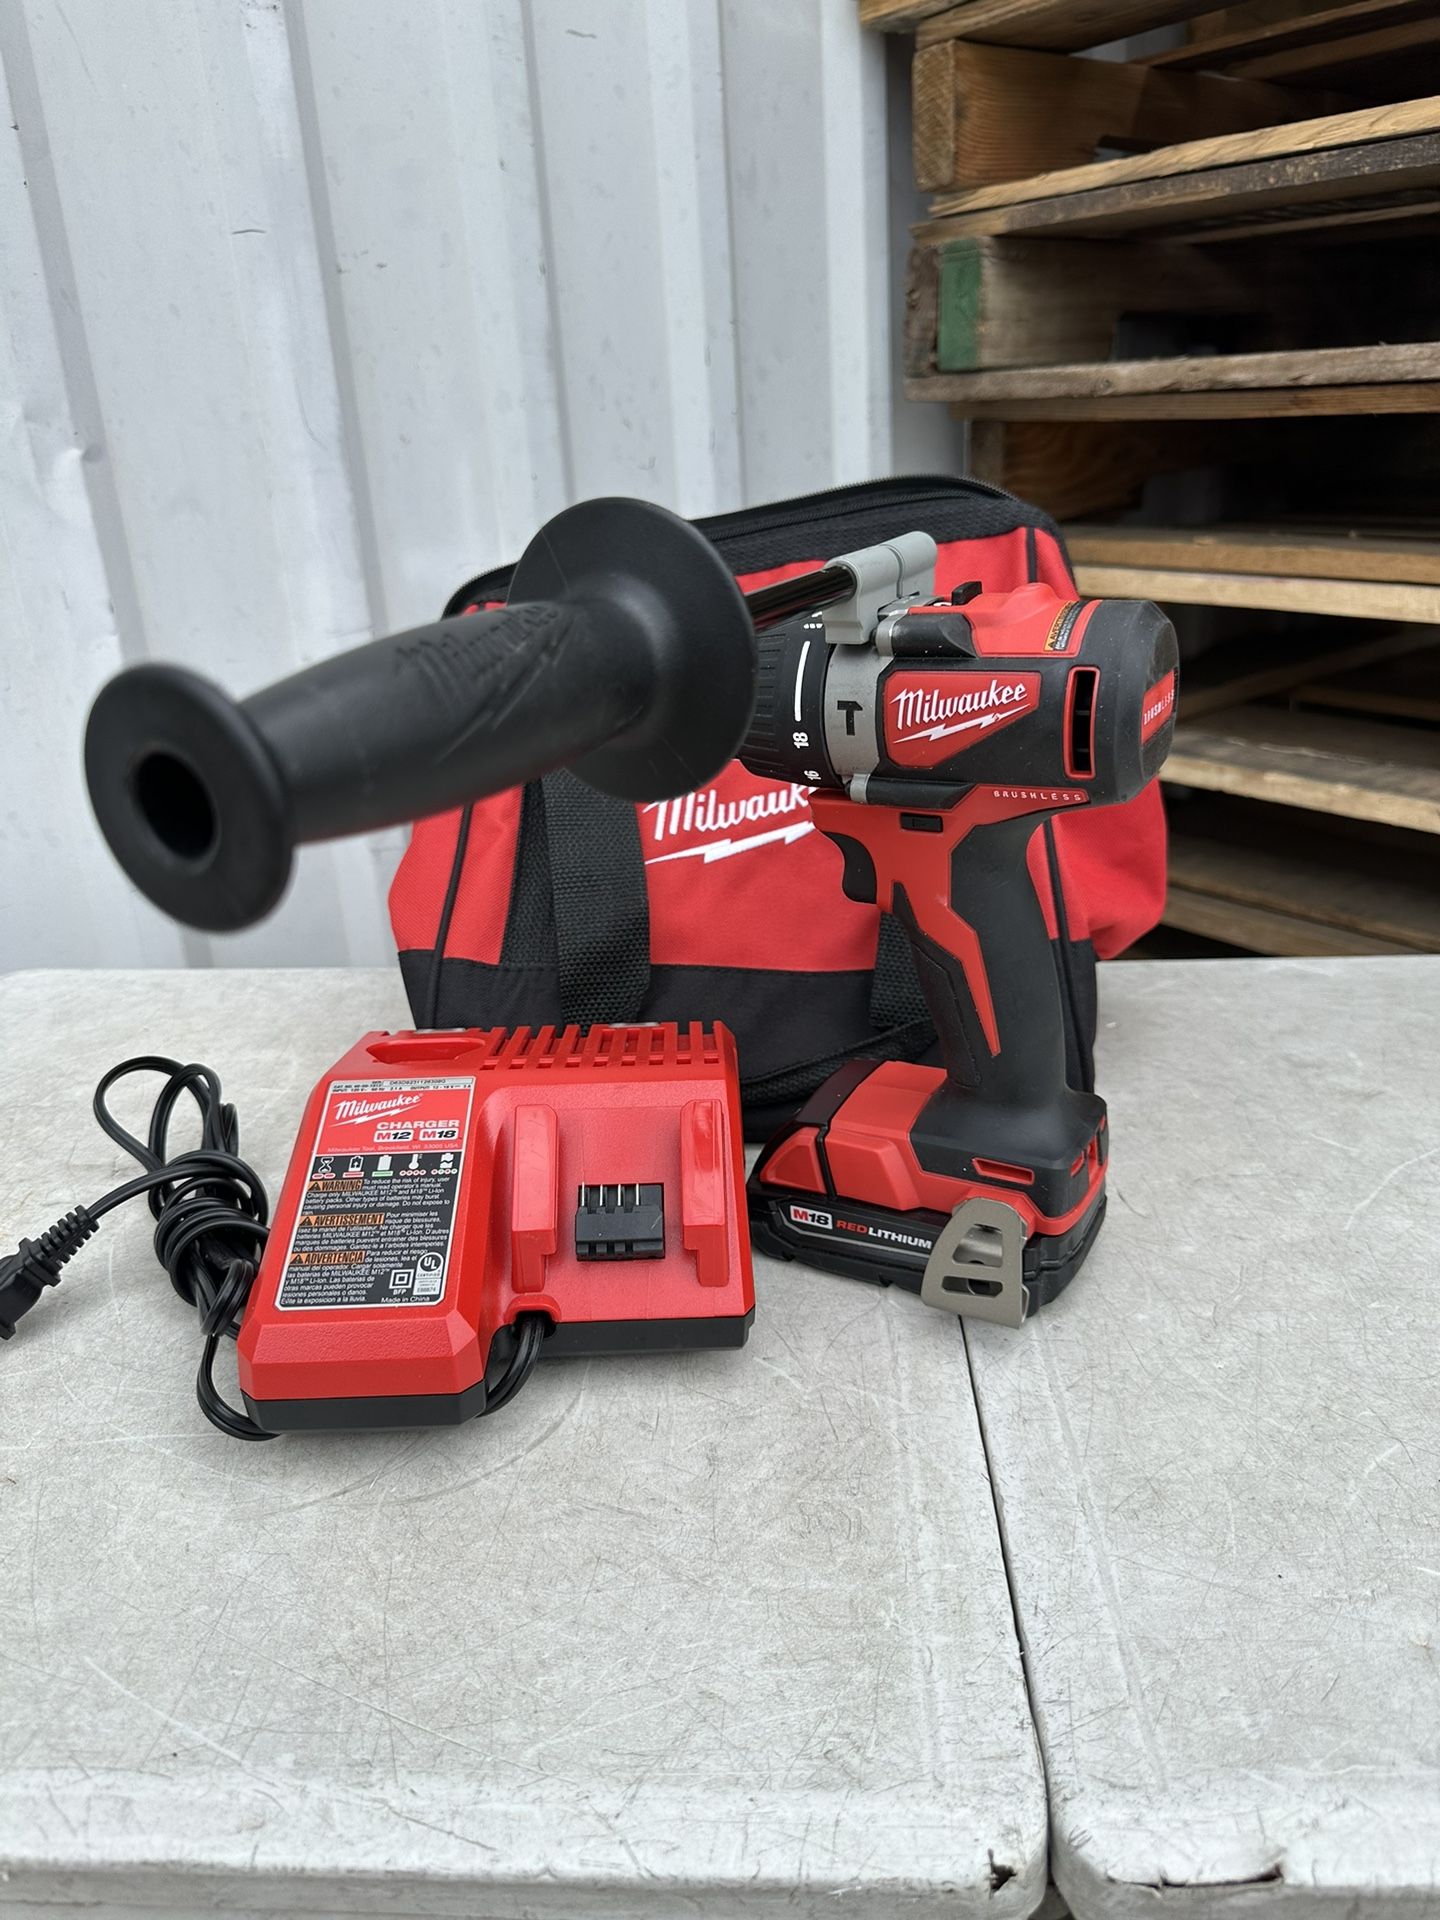 Milwaukee M18 Hammer Drill 1.5 battery + charger USED $125